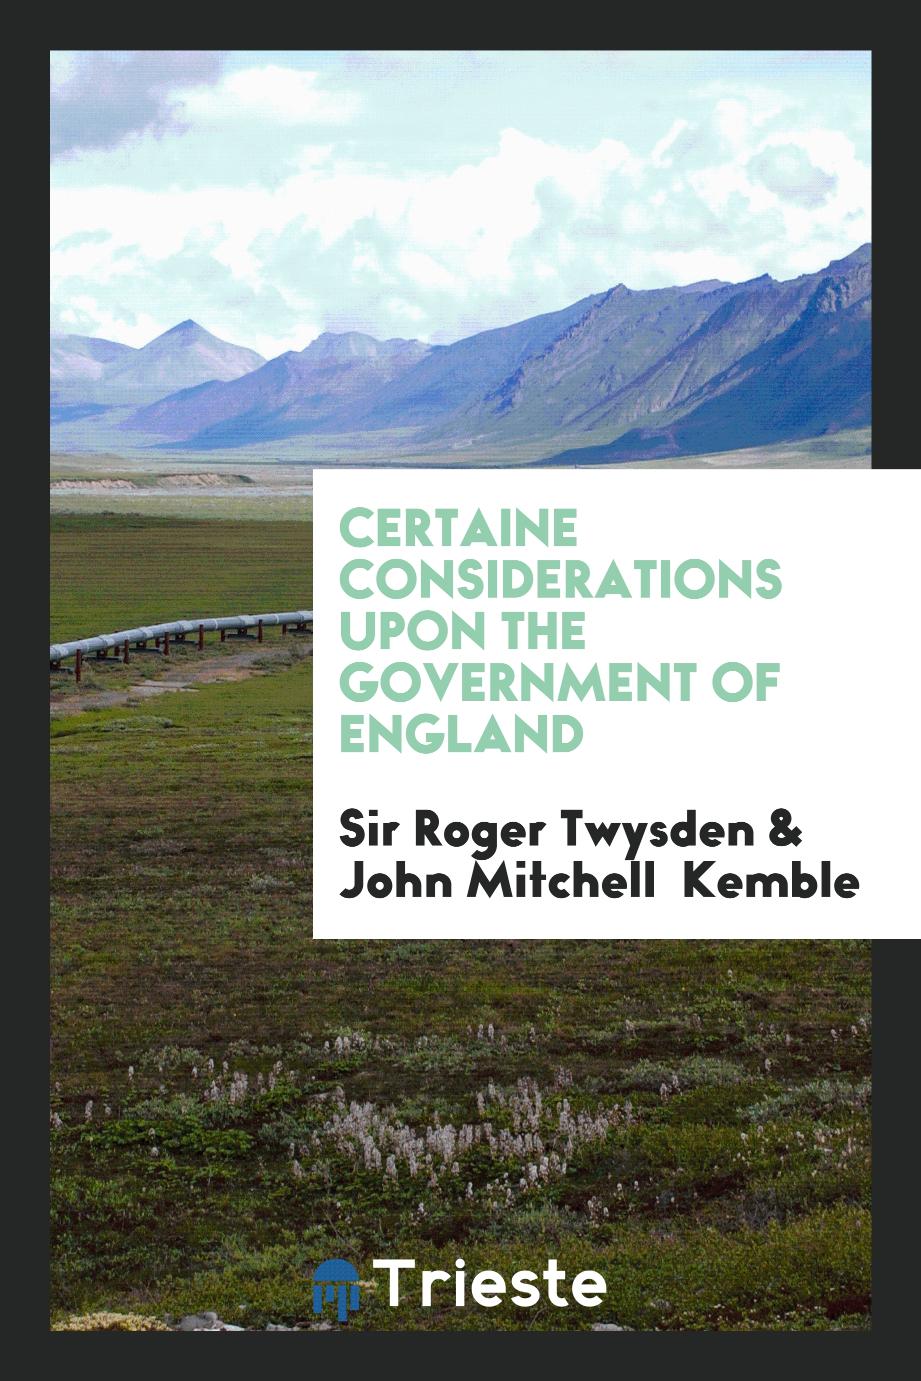 Certaine Considerations Upon the Government of England